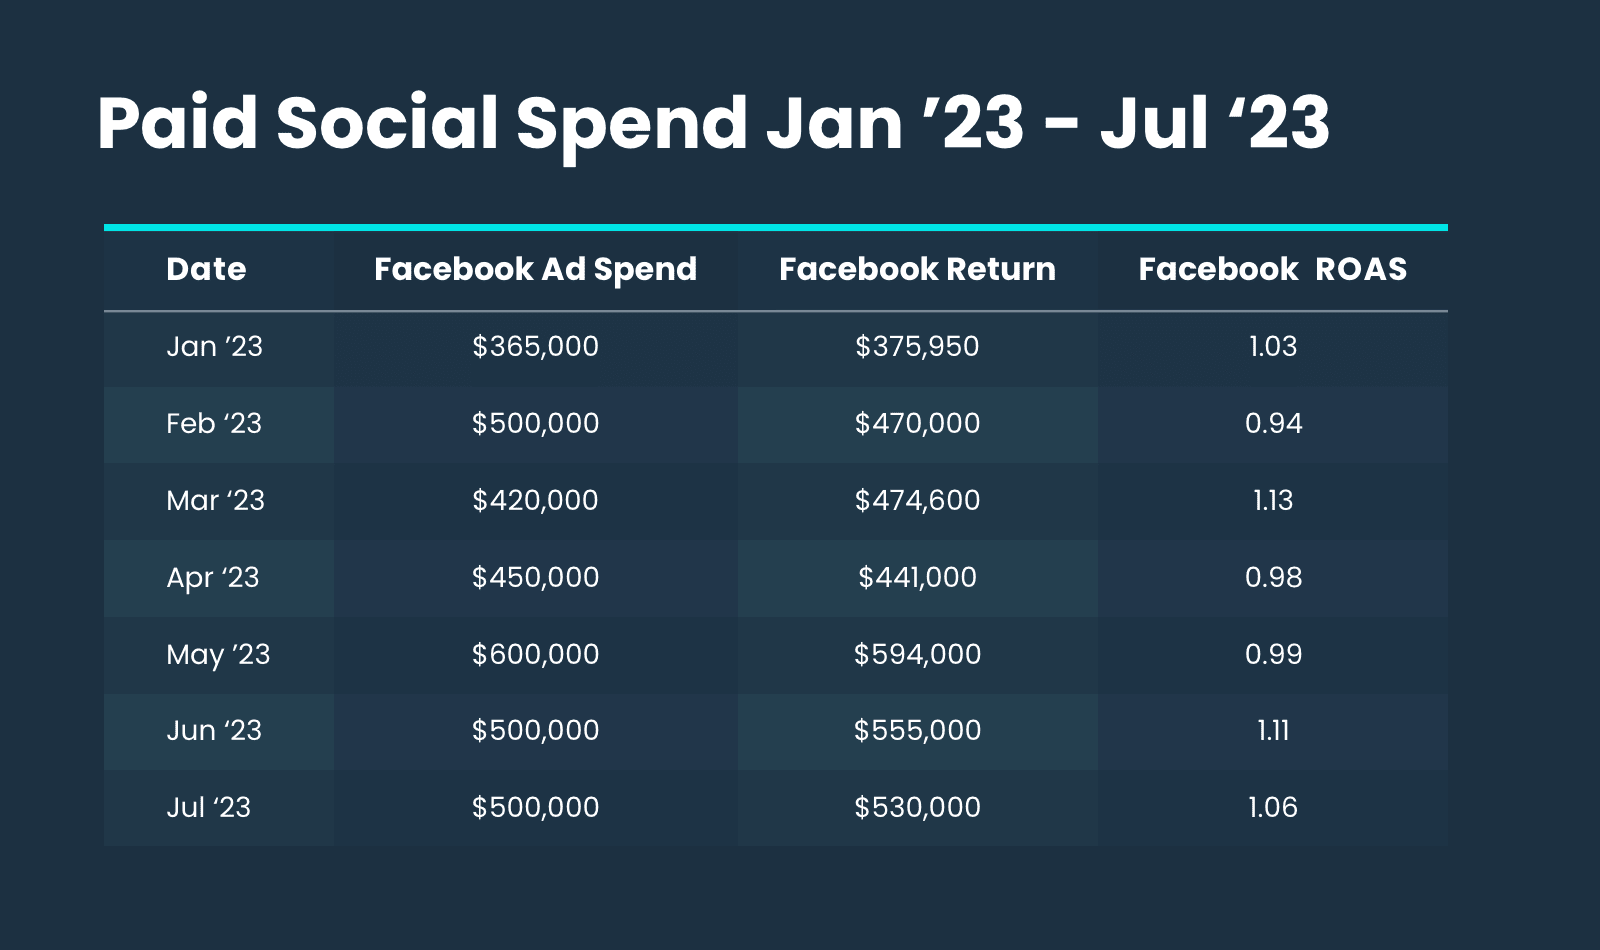 Paid Social (Facebook) Spend for our sample business from January 2023 through July 2023